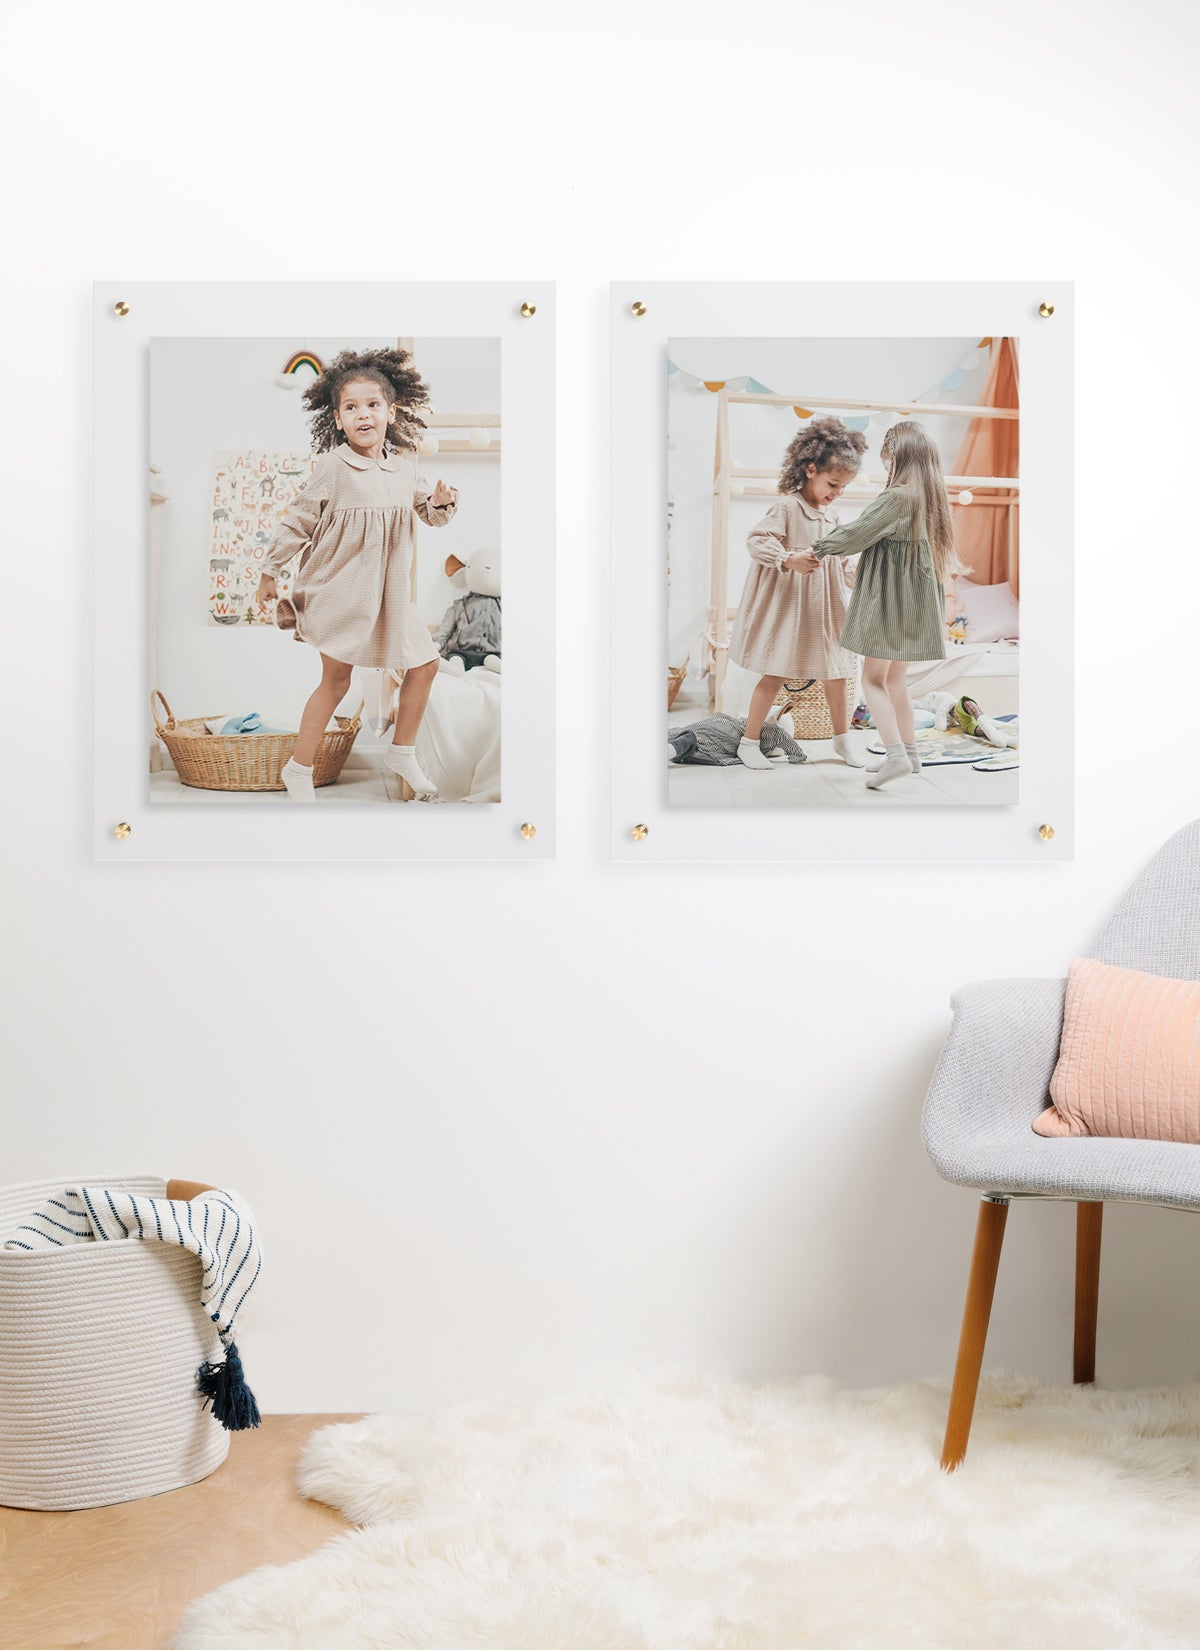 Two large Artifact Uprising Floating Frames on wall featuring photo of little girl